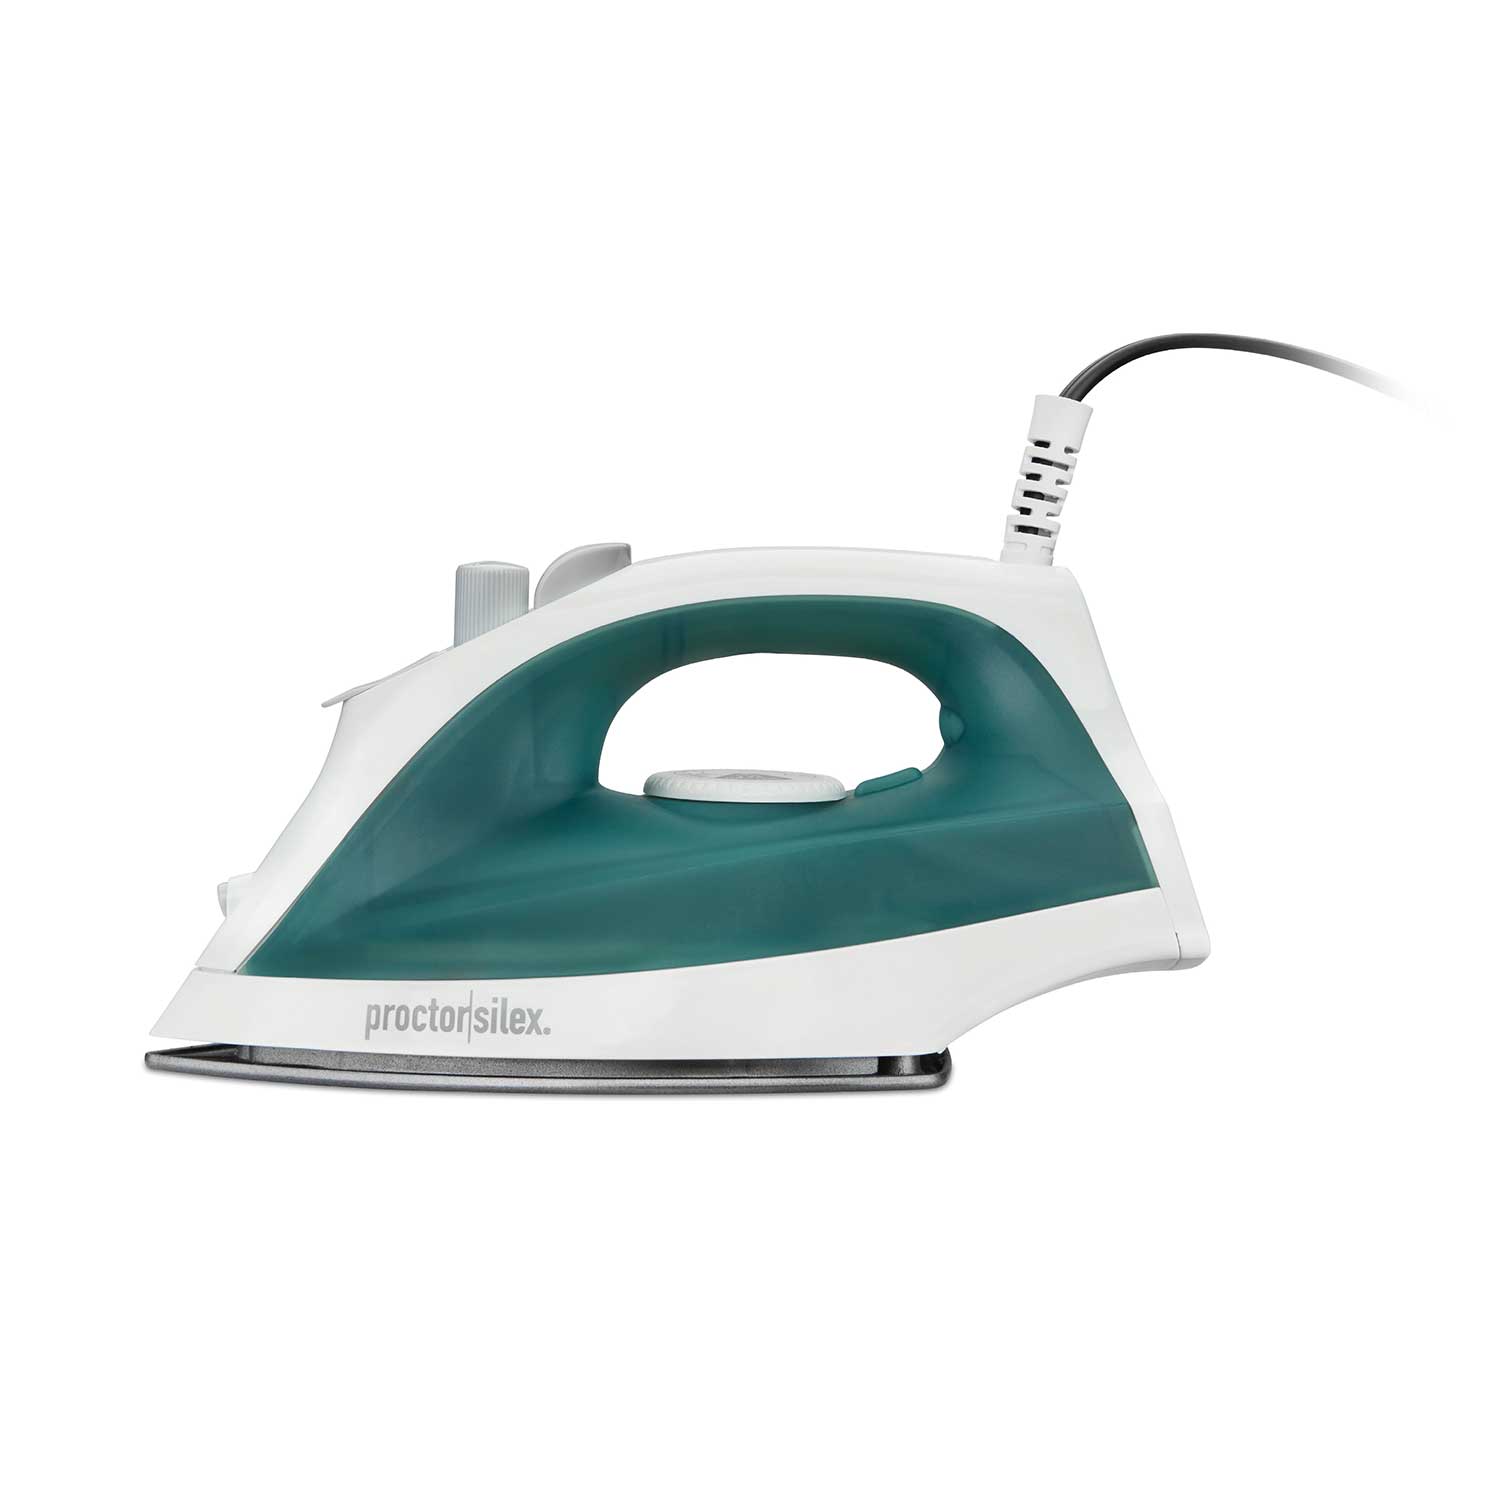 Nonstick Steam Iron with Water Window - Model 17291PS Small Size